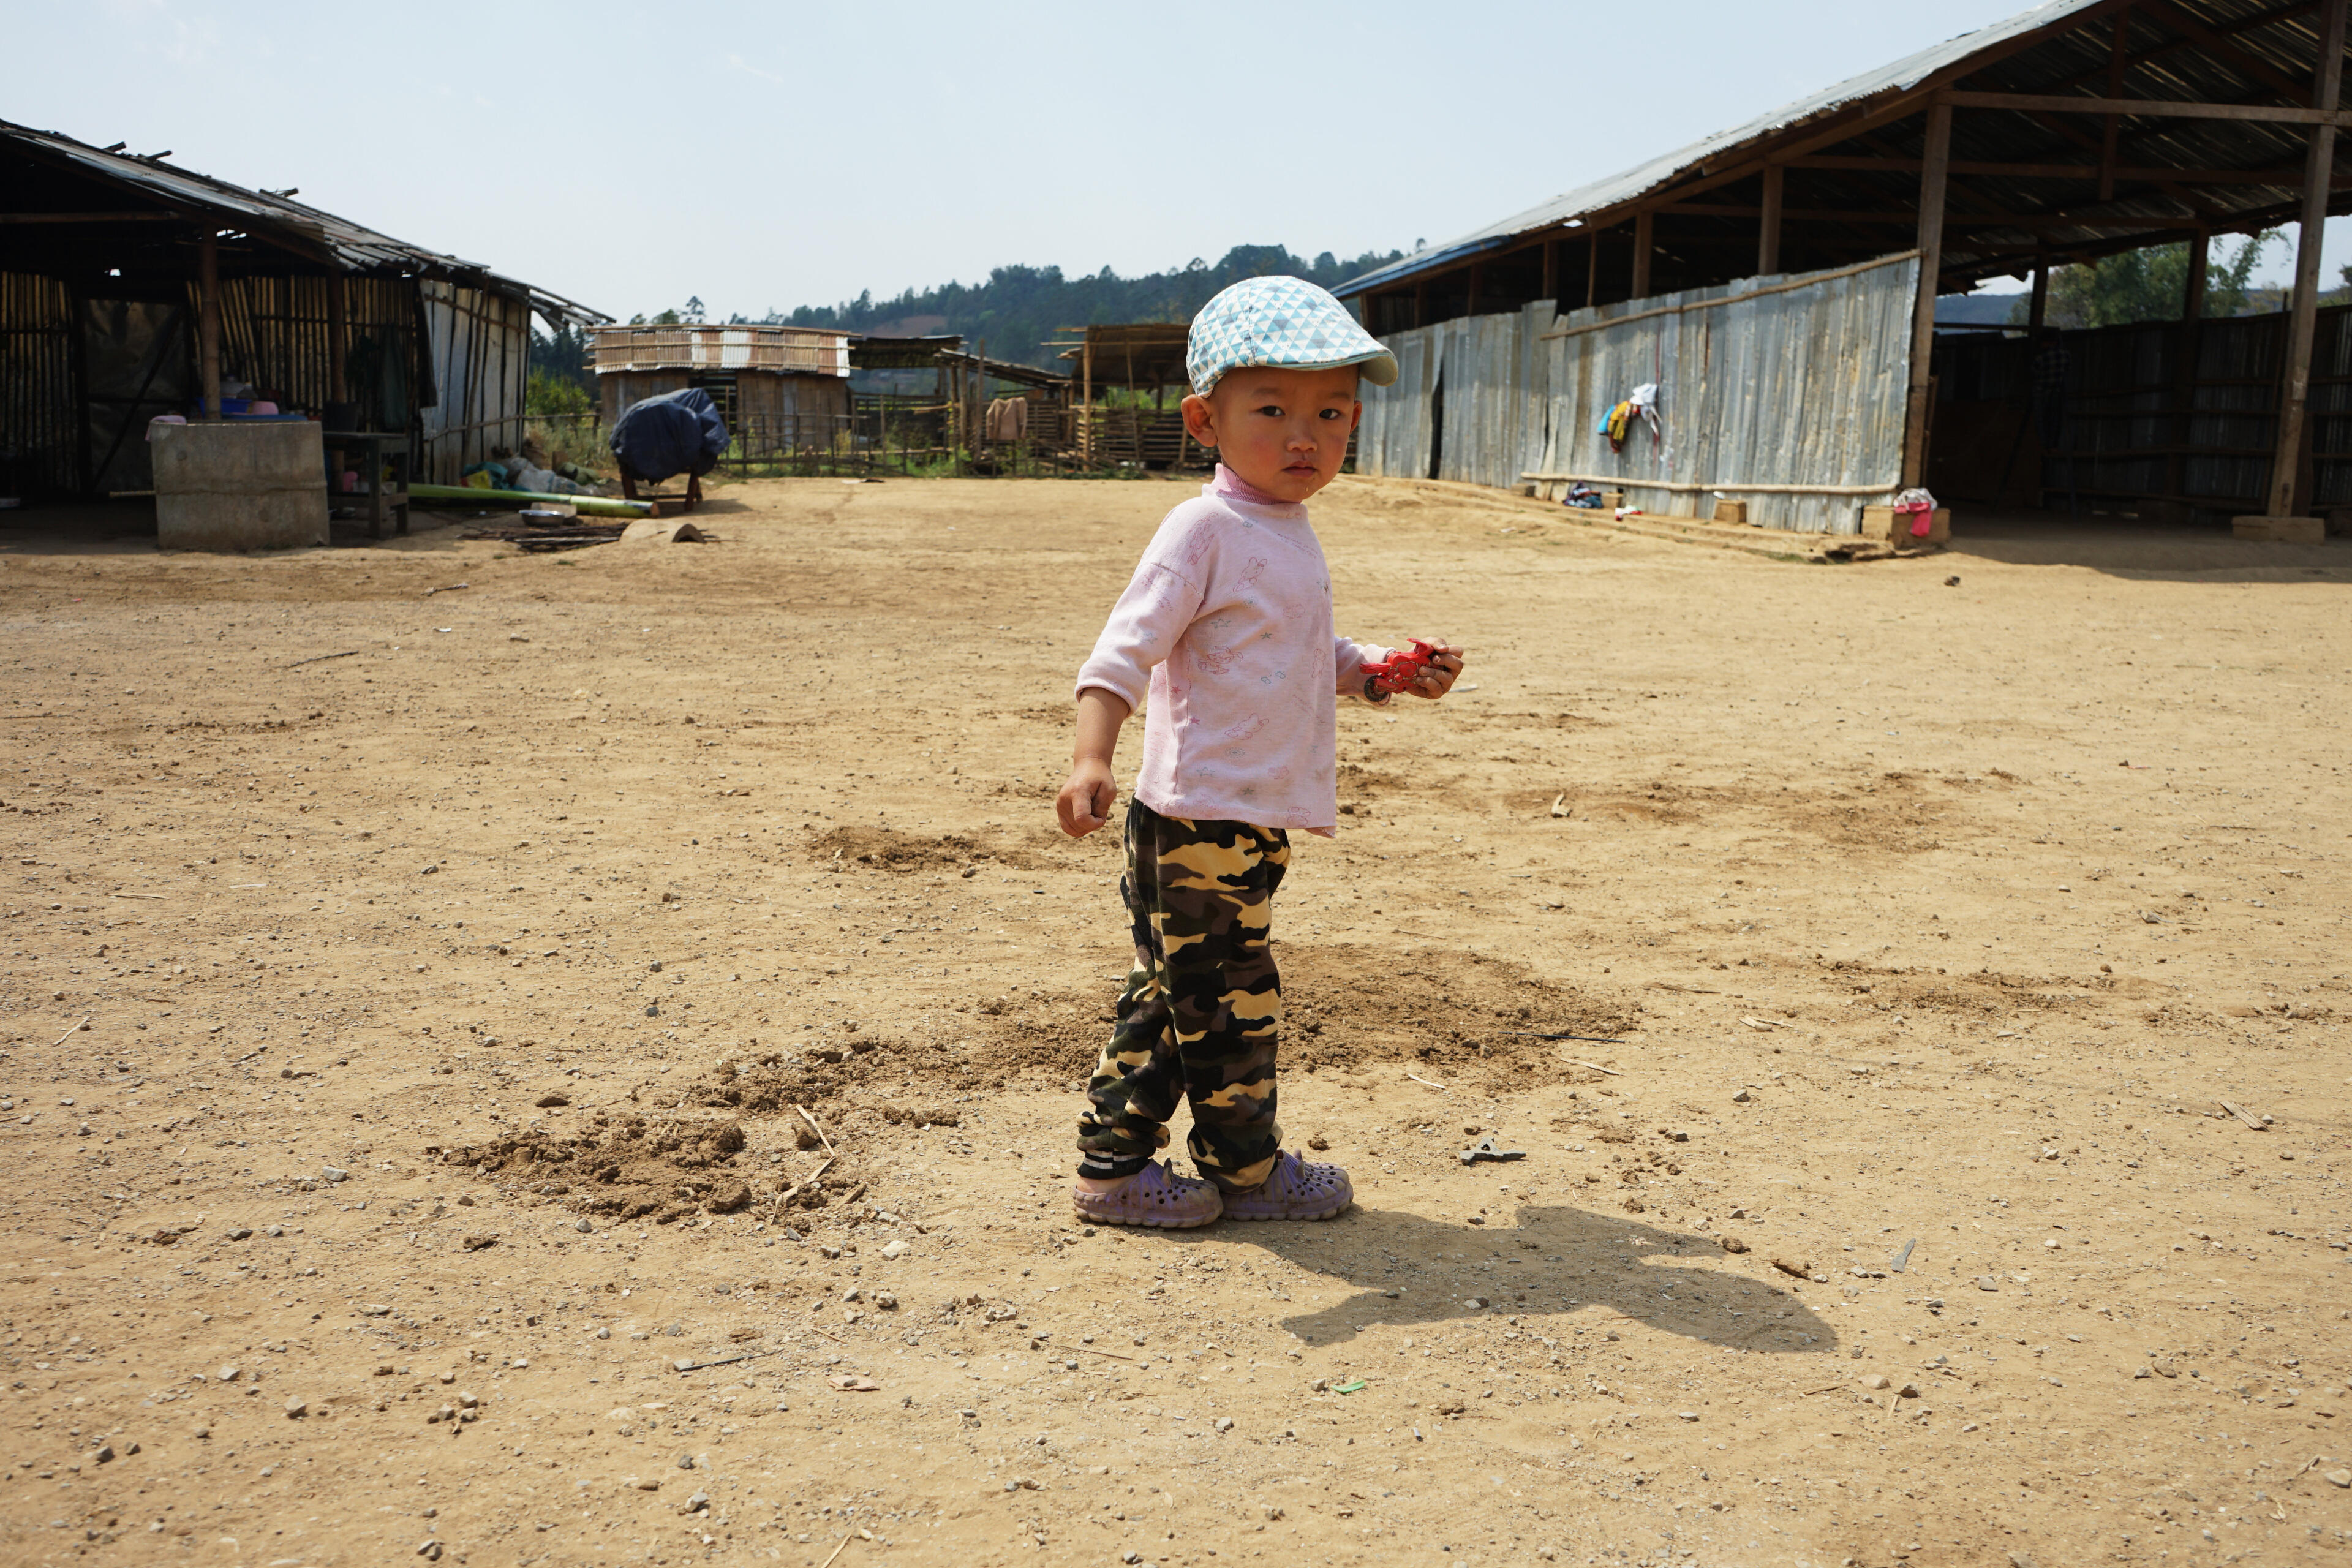 A toddler boy holds a small toy motorcycle as he stands in a wide dusty area between long, corrugated tin structures in a displacement camp.